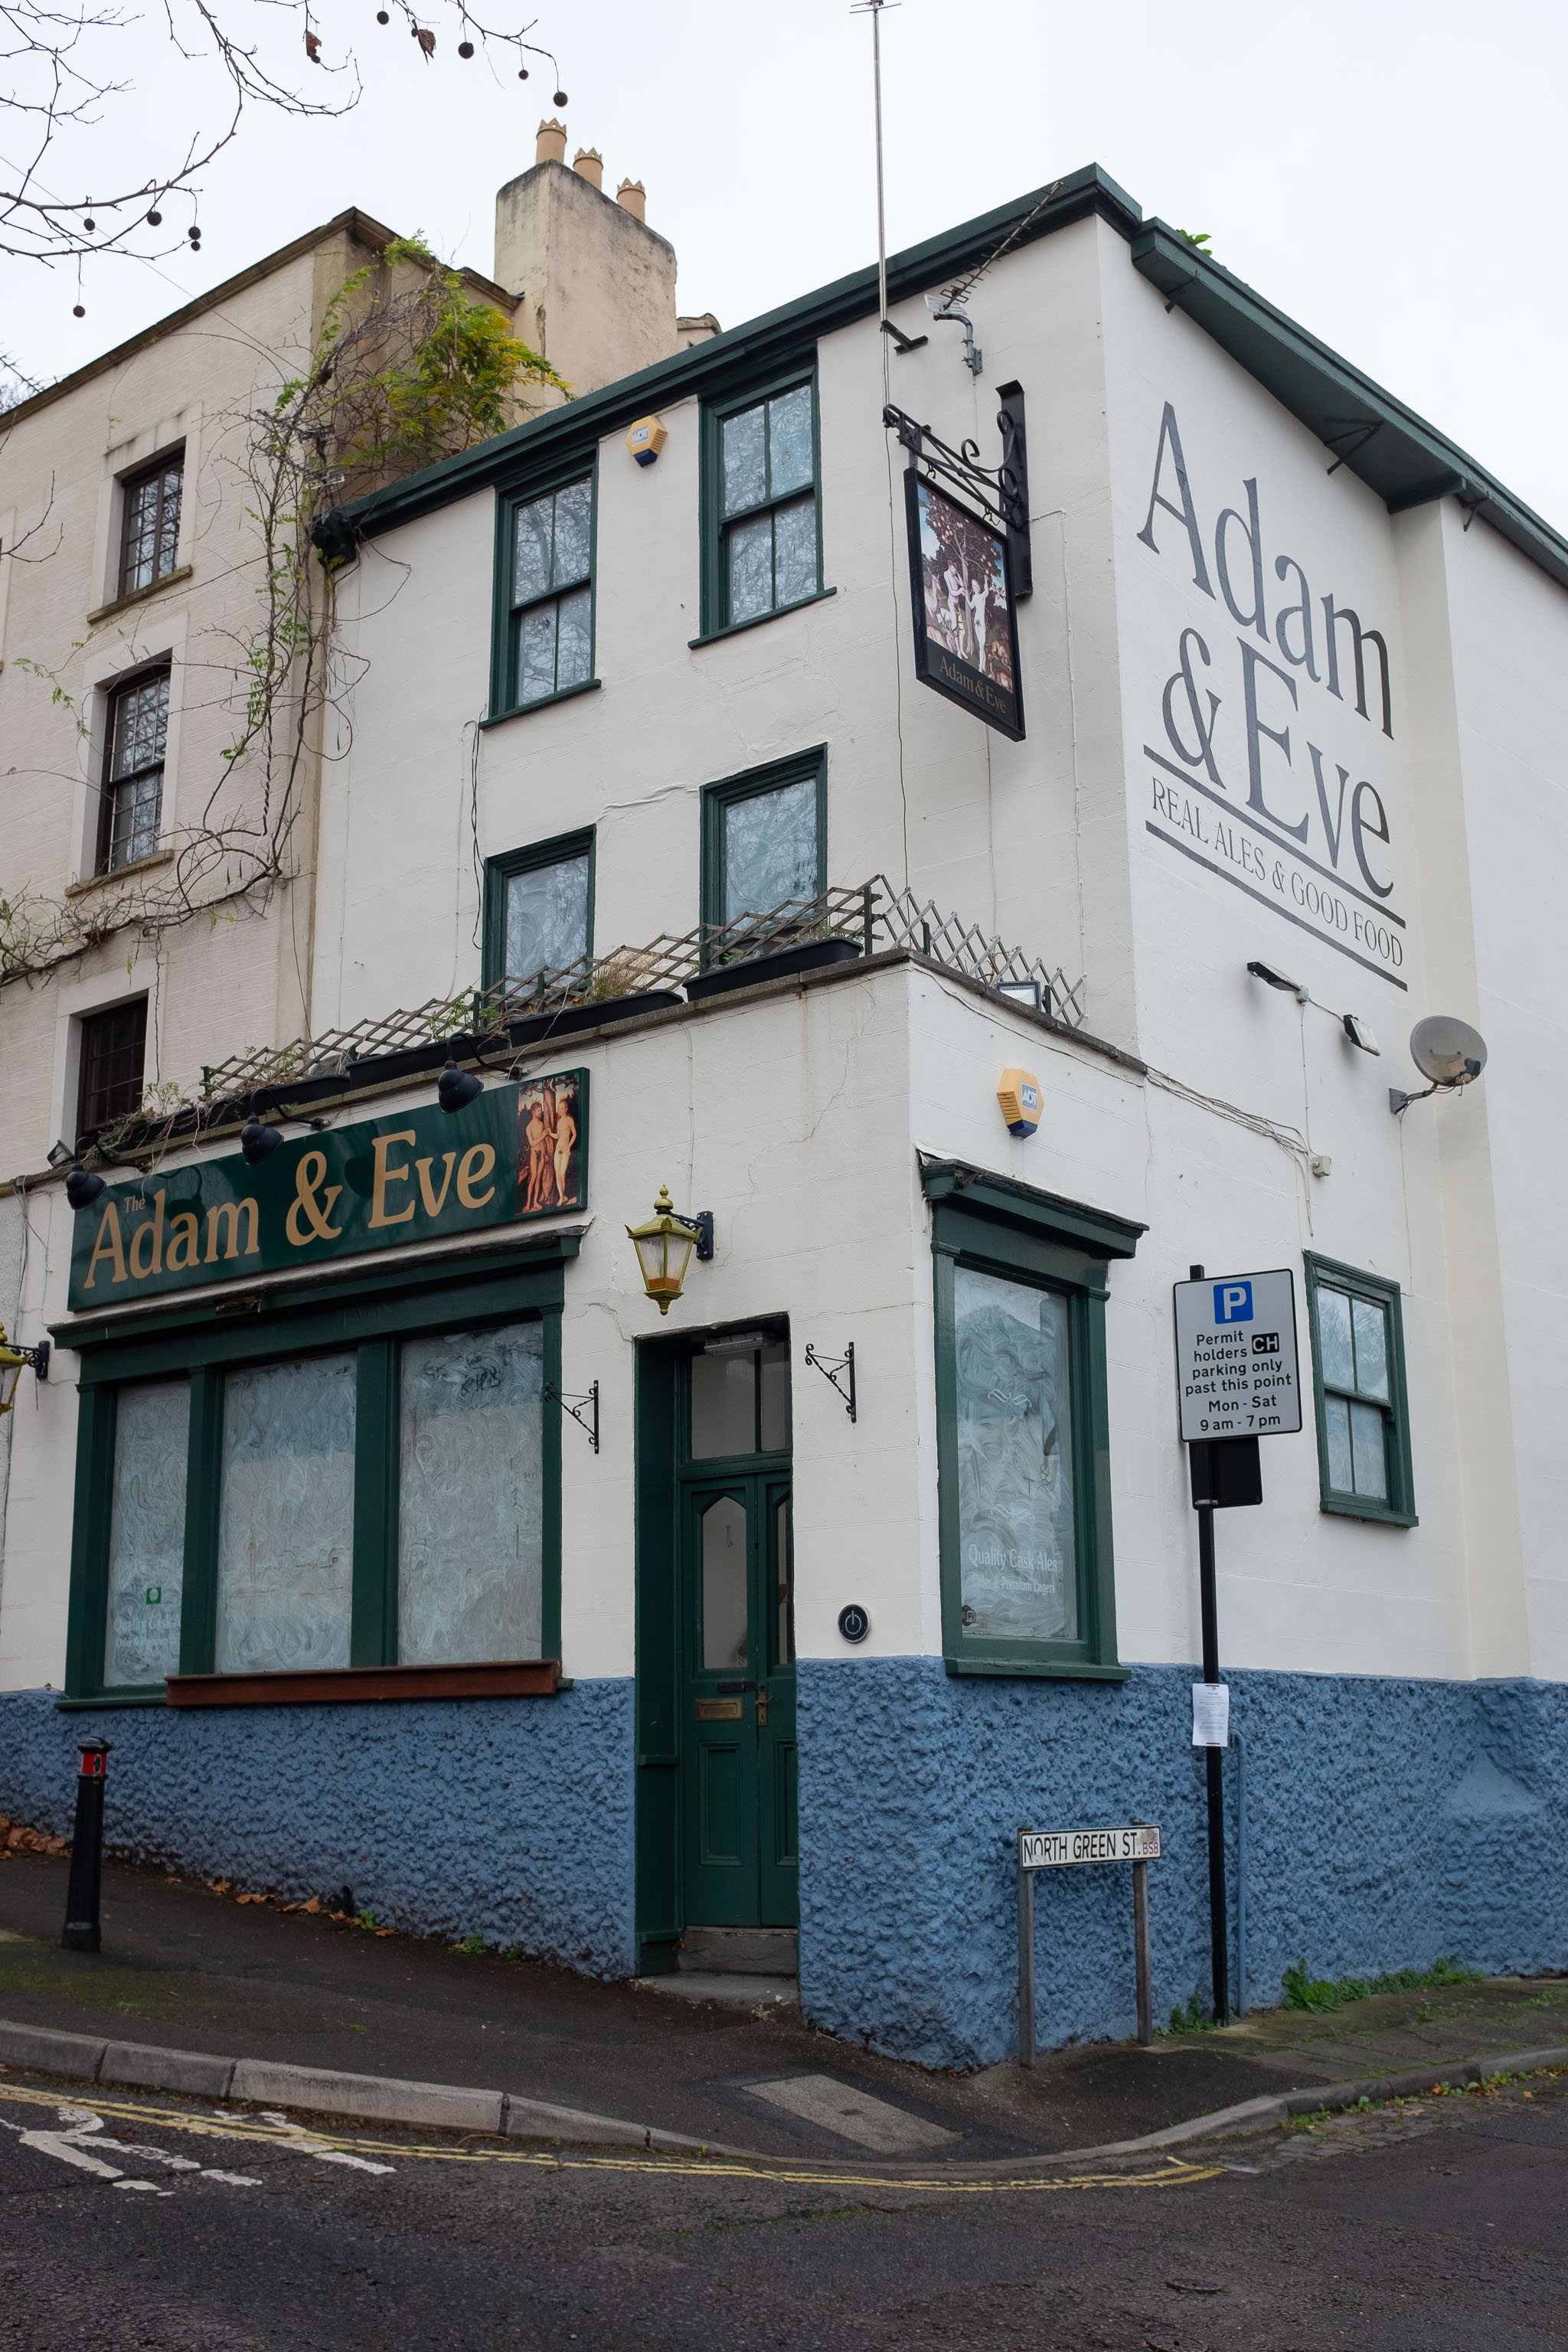 Adam & Eve
There are yet more plans to turn this pub into yet more flats. I heard from a few different people that the owner has a habit of renting it to peop...